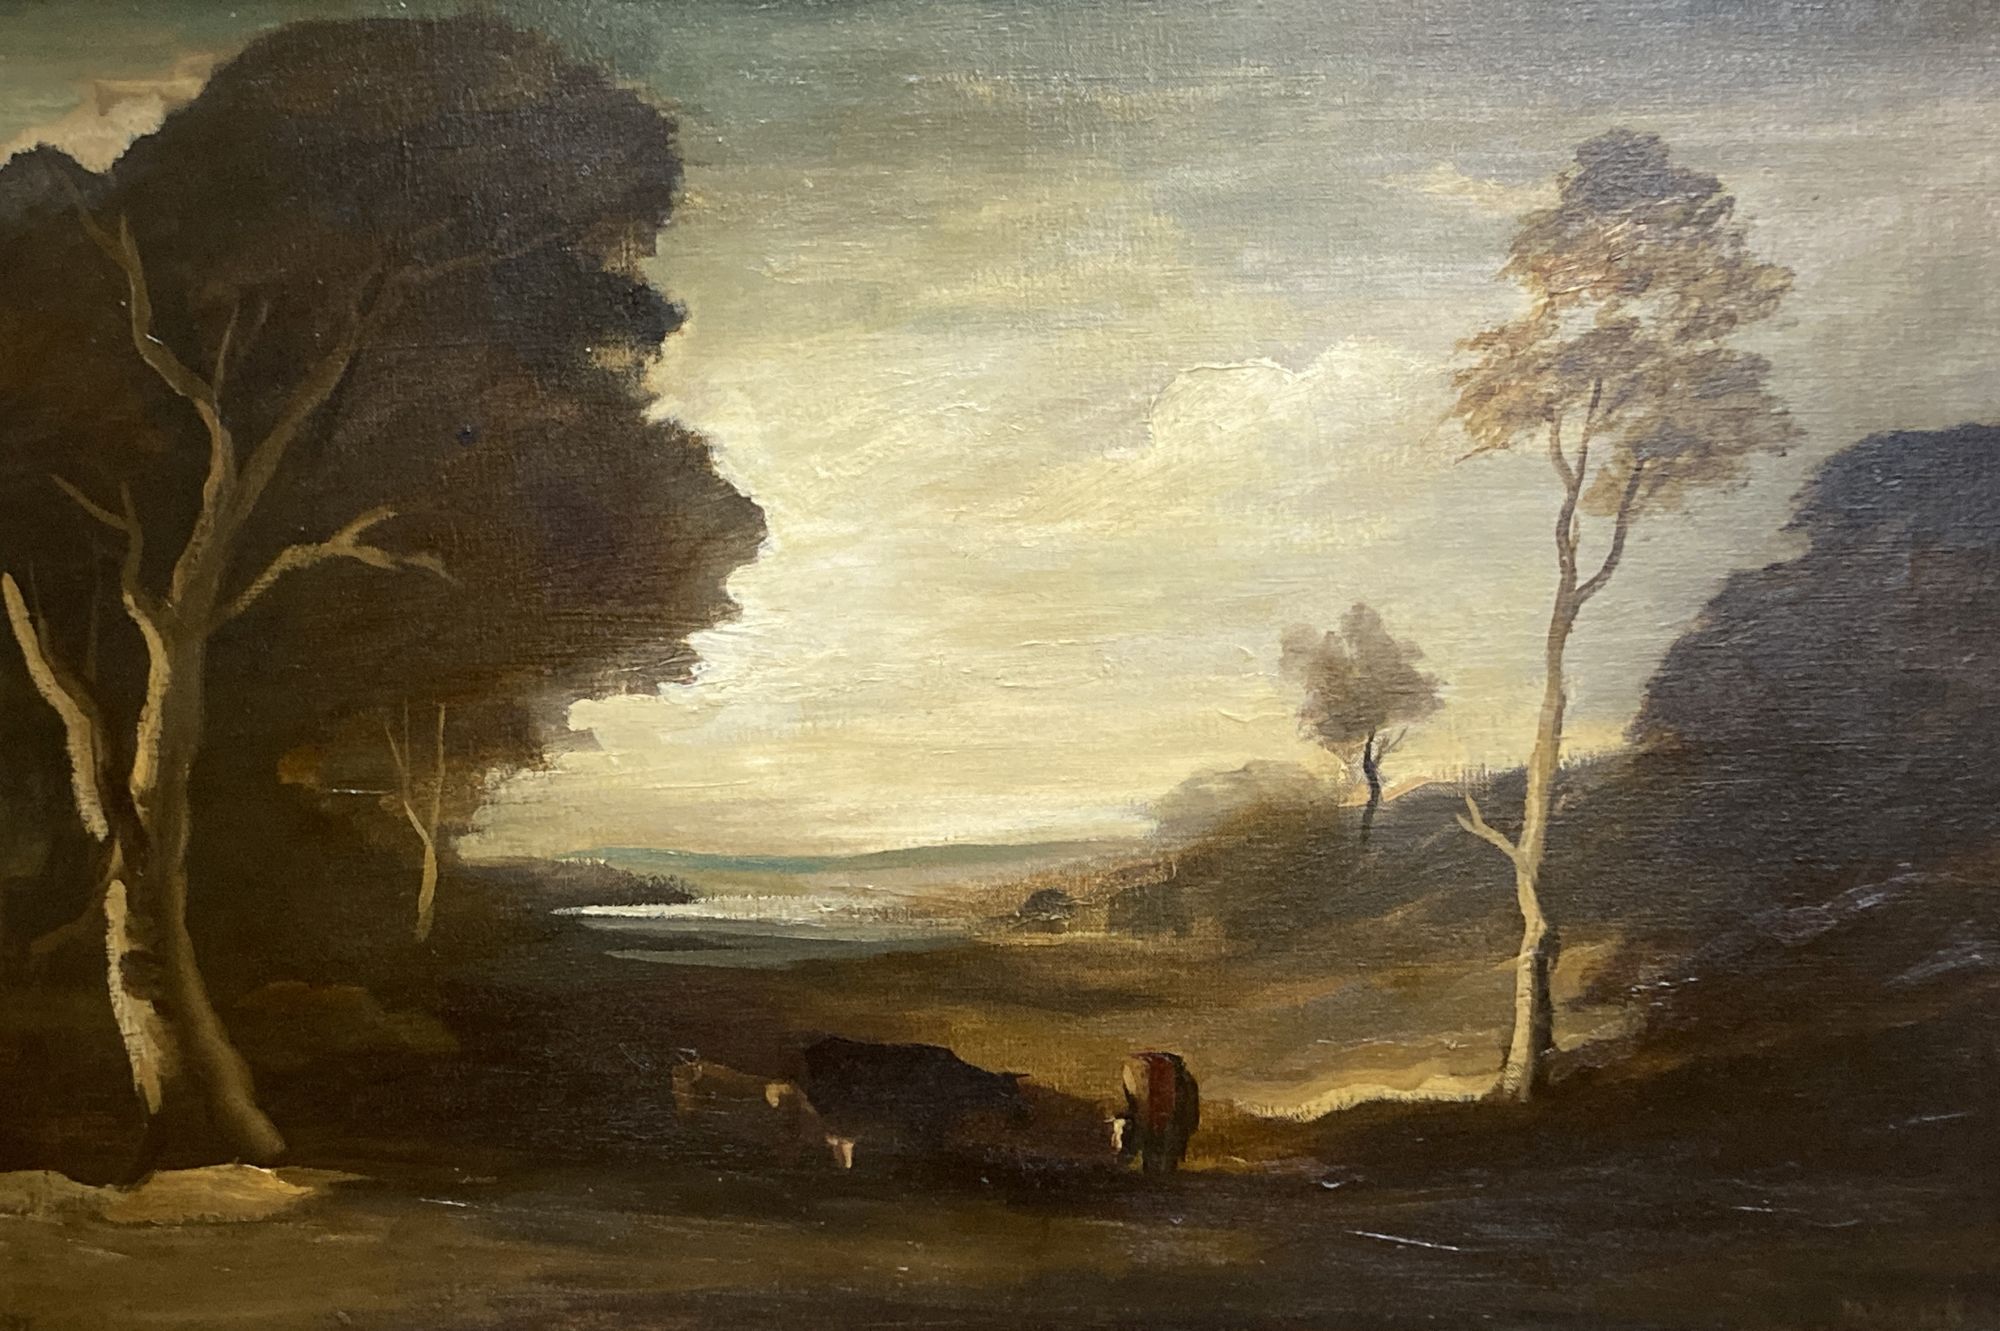 Philip Hugh Padwick (1876-1958), oil on canvas, Cattle and trees in a landscape, 60 x 91cm